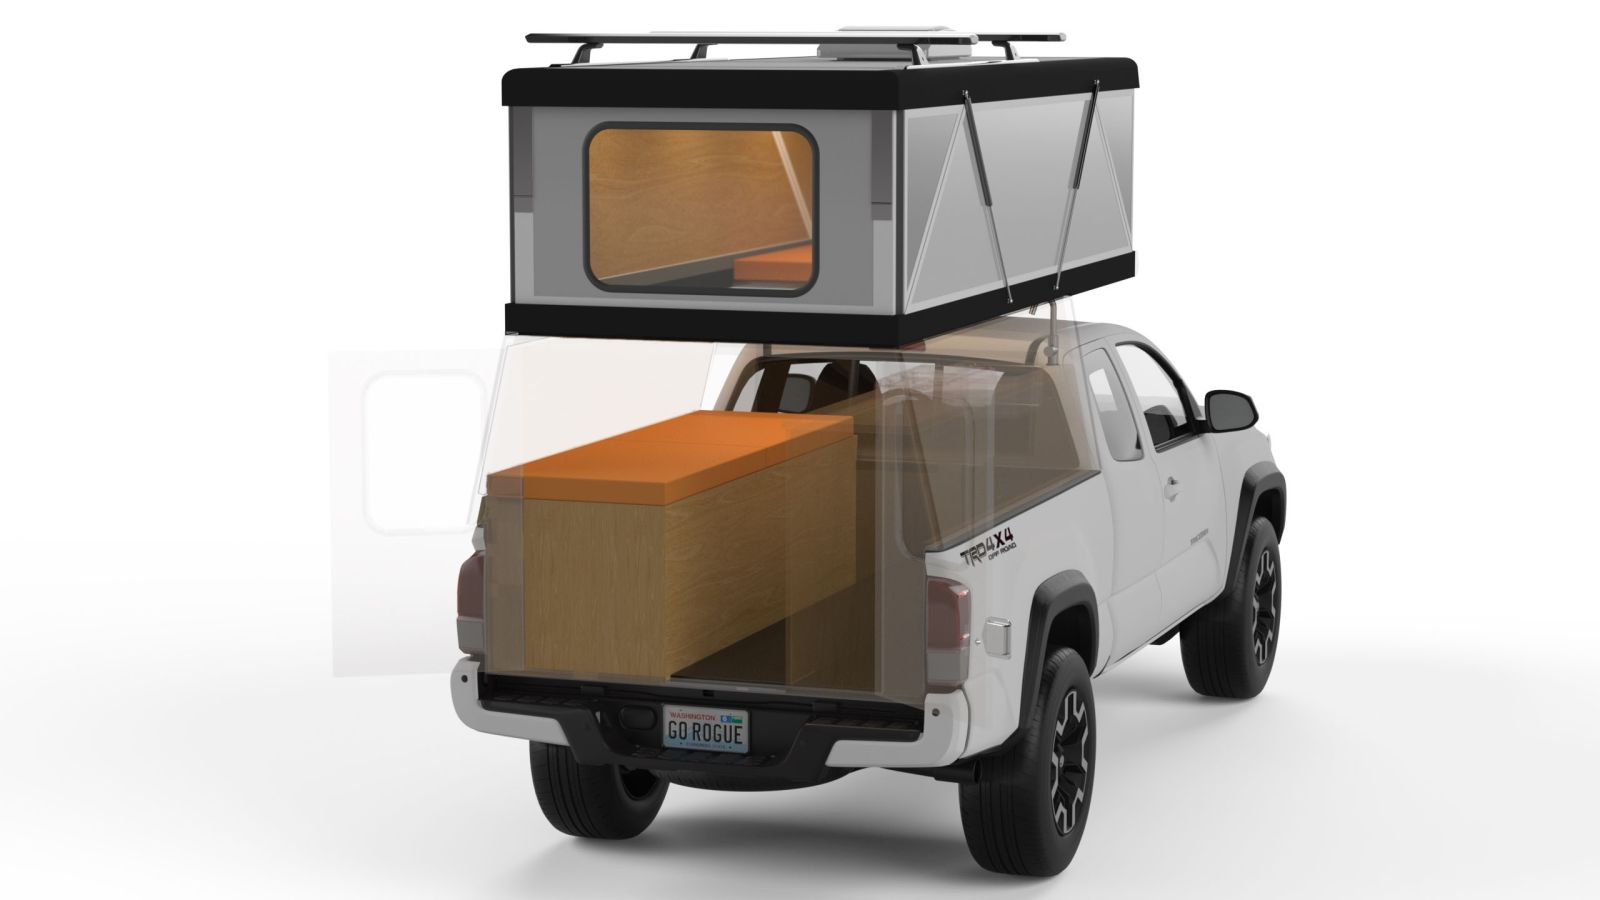 hiatus campers serves off road adventurers with one machine and it s all we need 5